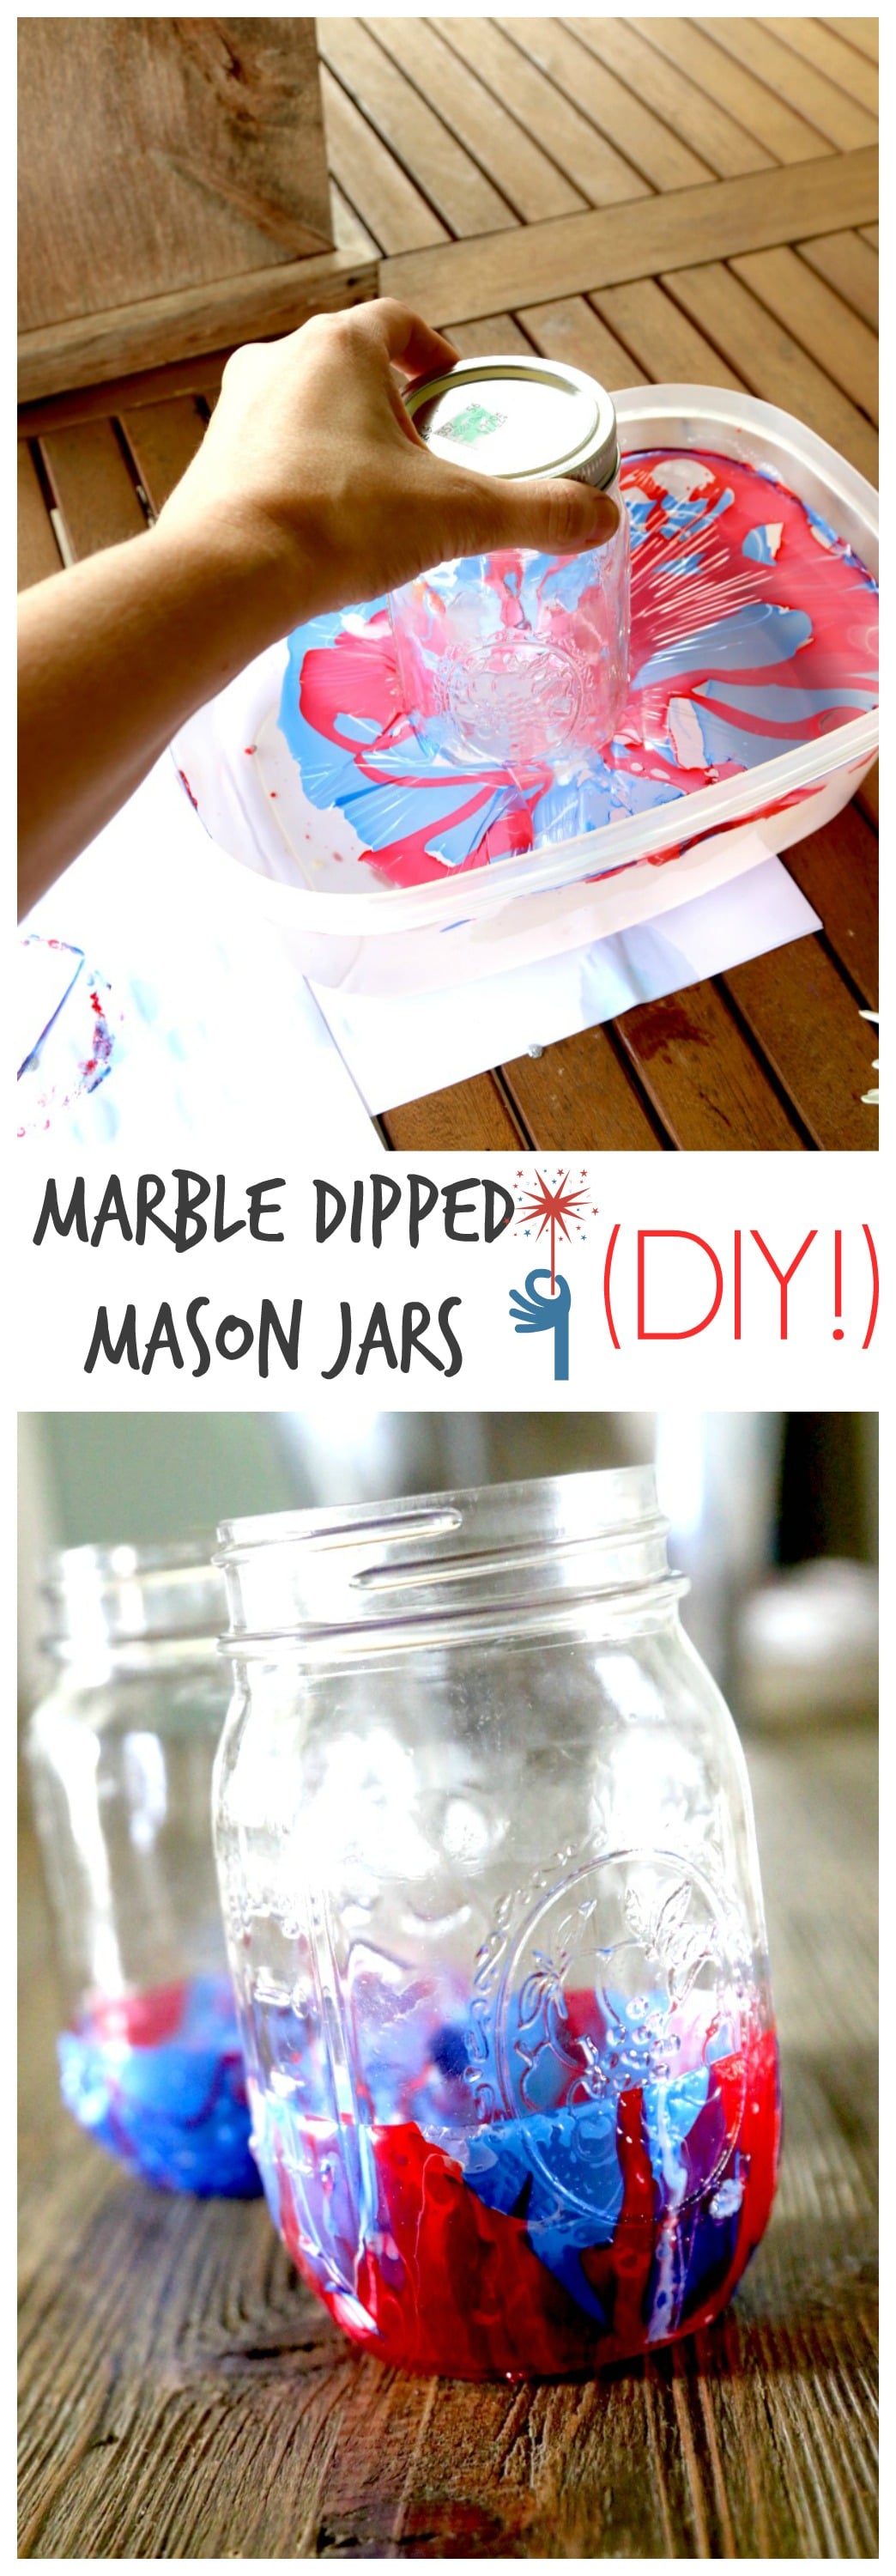 Marble dipping DIY tutorial photos from start to finish on MomDot.